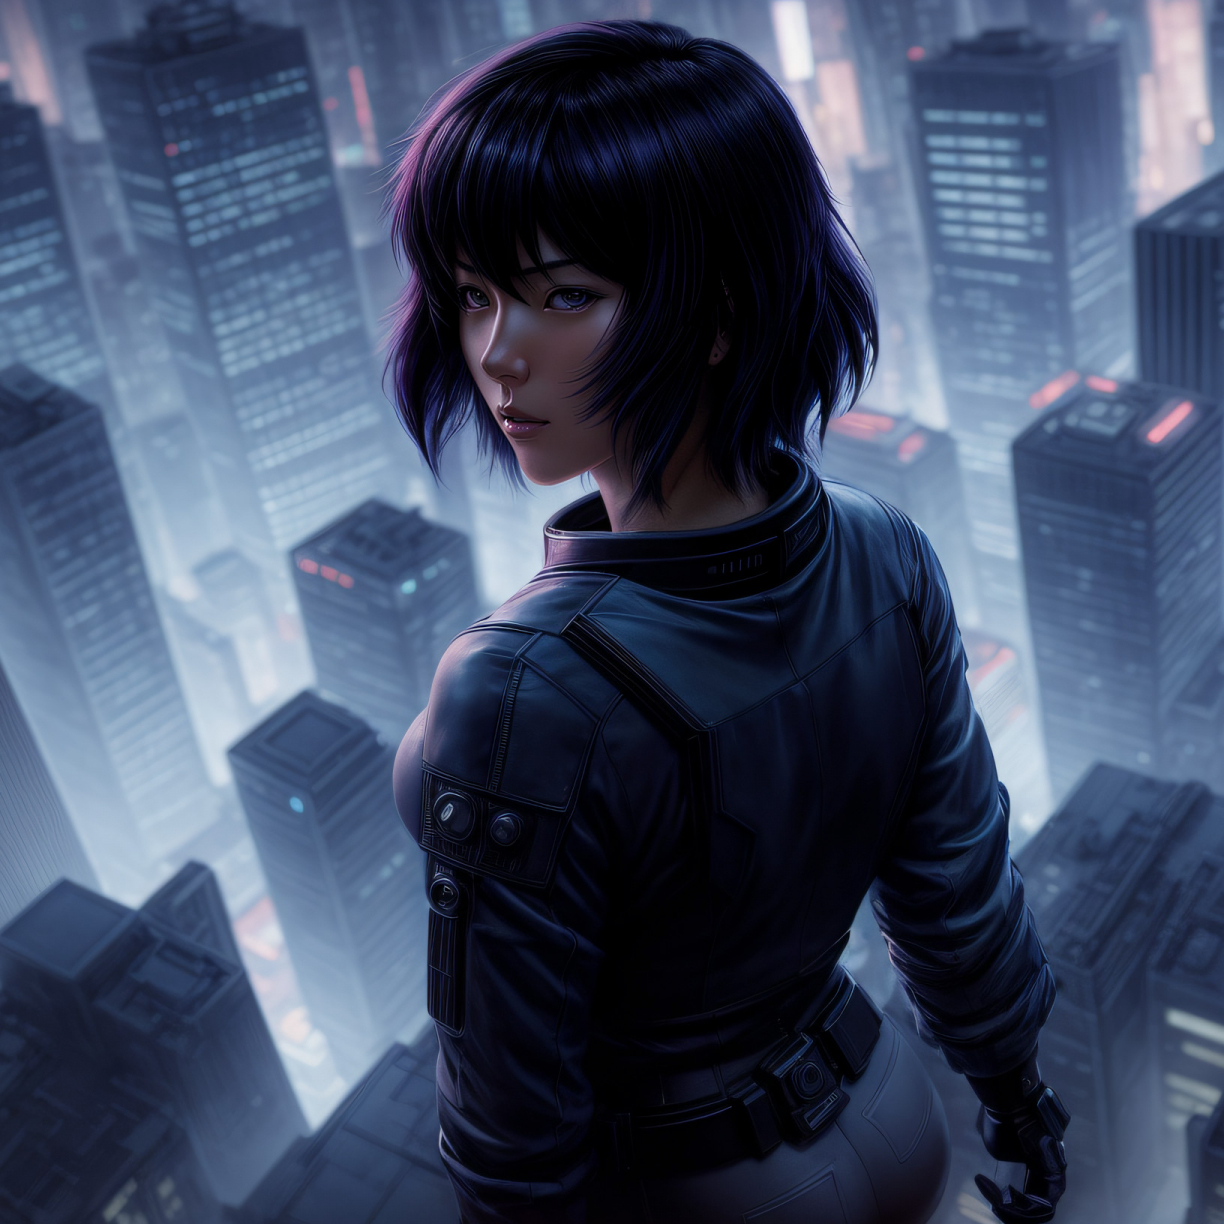 Beautiful girl, Ghost in the Shell, anime art, 1224x1224 wallpaper